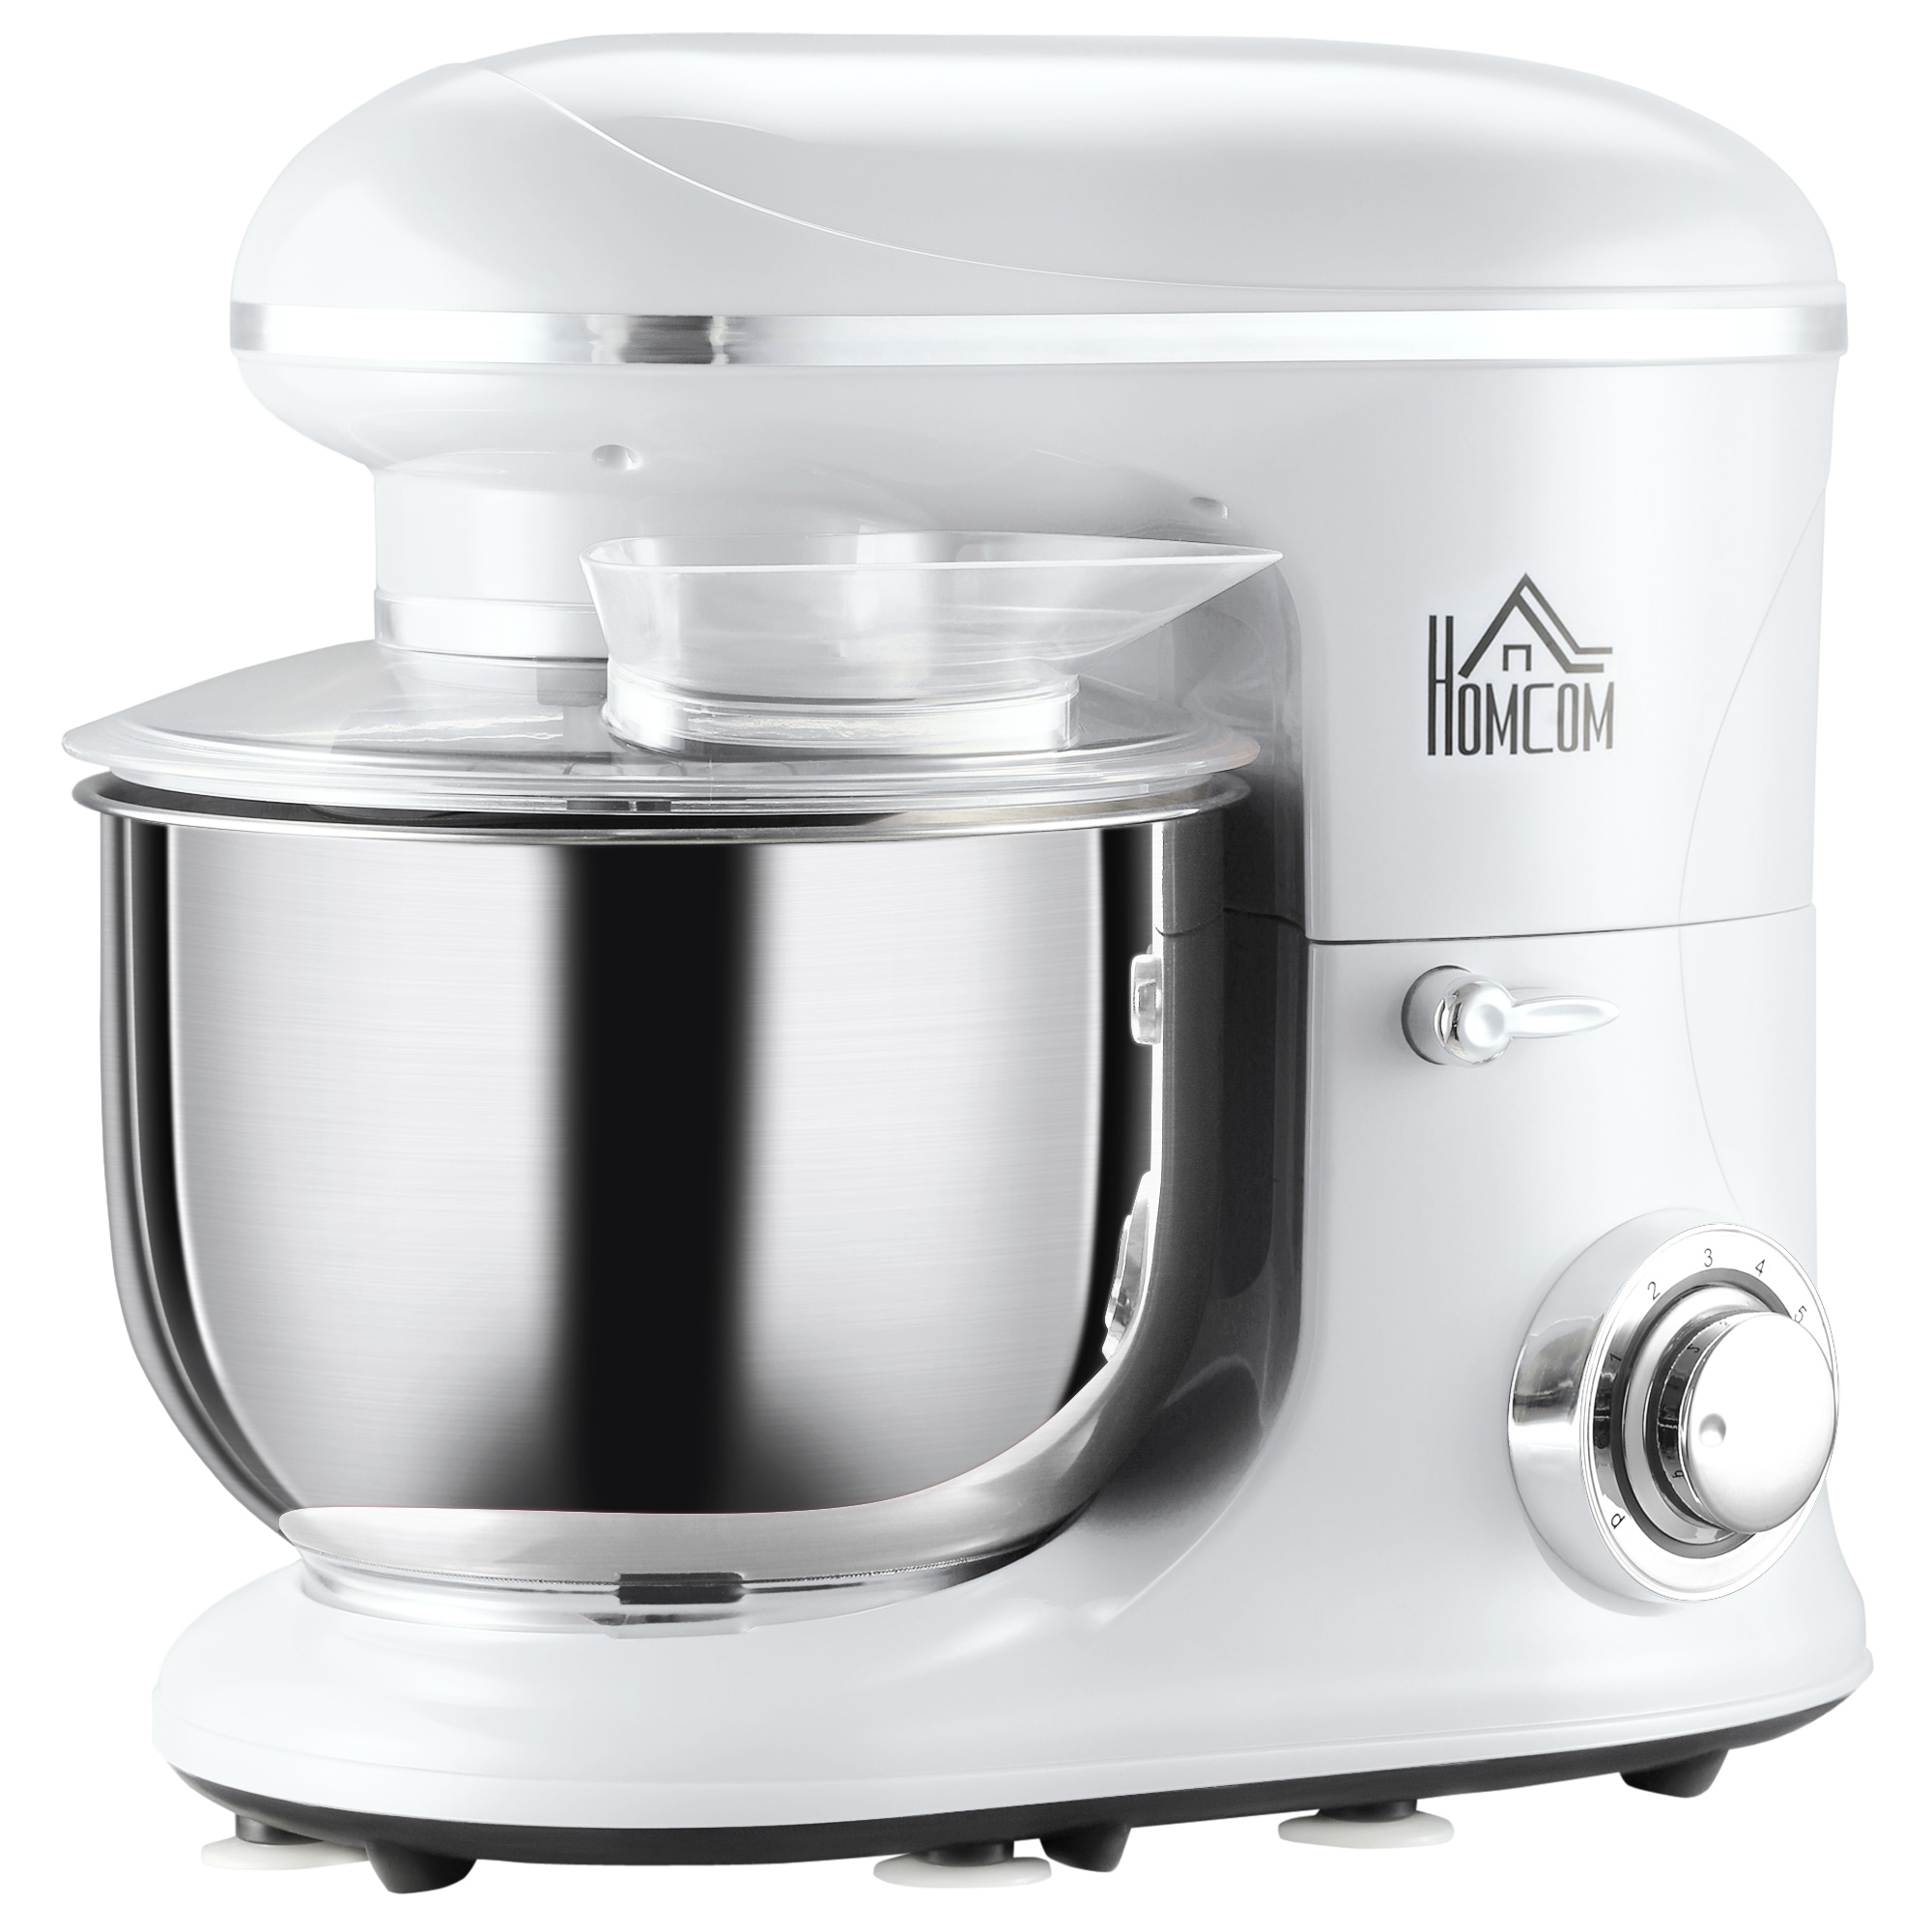 https://ak1.ostkcdn.com/images/products/is/images/direct/b68416237b4f2525928b654f845fc4adbfb39d3a/HOMCOM-Stand-Mixer-with-6%2B1P-Speed%2C-600W-Tilt-Head-Kitchen-Electric-Mixer-with-6-Qt-Stainless-Steel-Mixing-Bowl.jpg